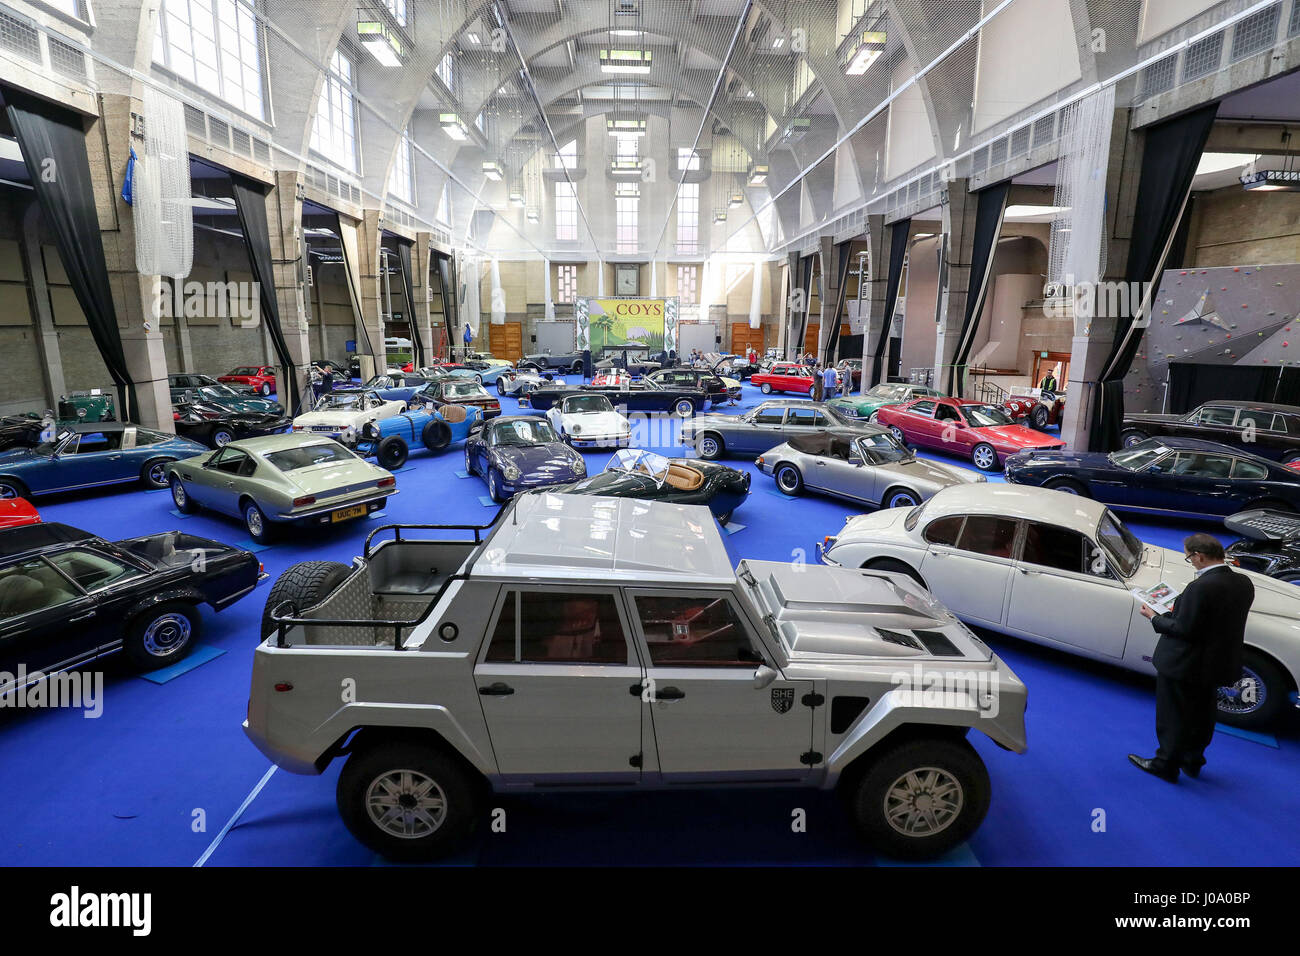 70 classic cars on display including a 1991 Lamborghini LM02 (foreground) during a preview for the upcoming Coys Spring Classics auction at the Royal Horticultural Society's Lindley Hall in London. Stock Photo